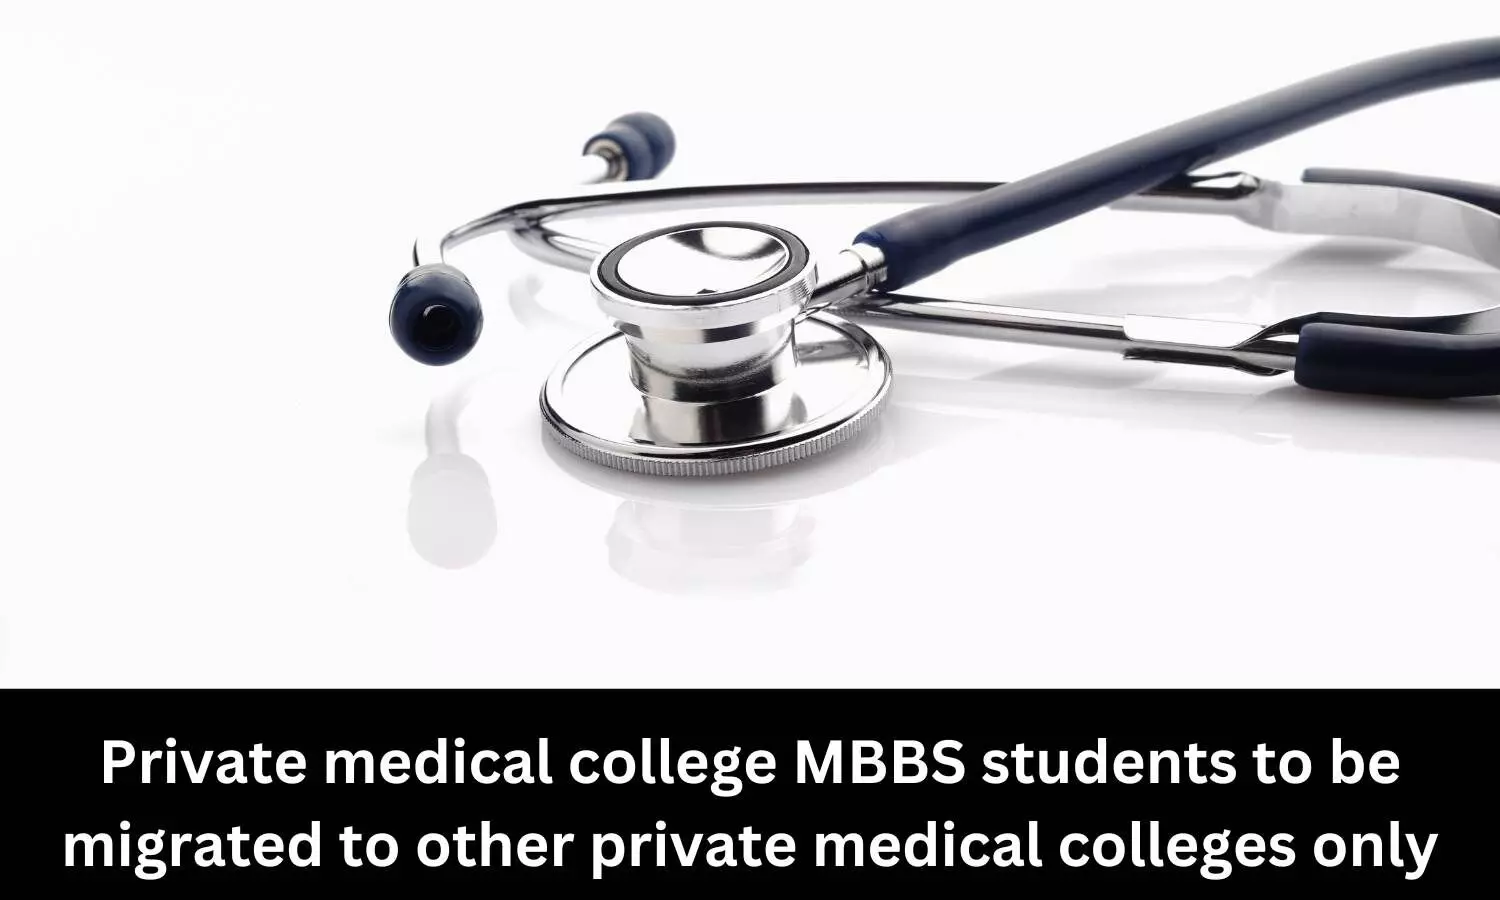 Private medical college MBBS students to be migrated to other private medical colleges only